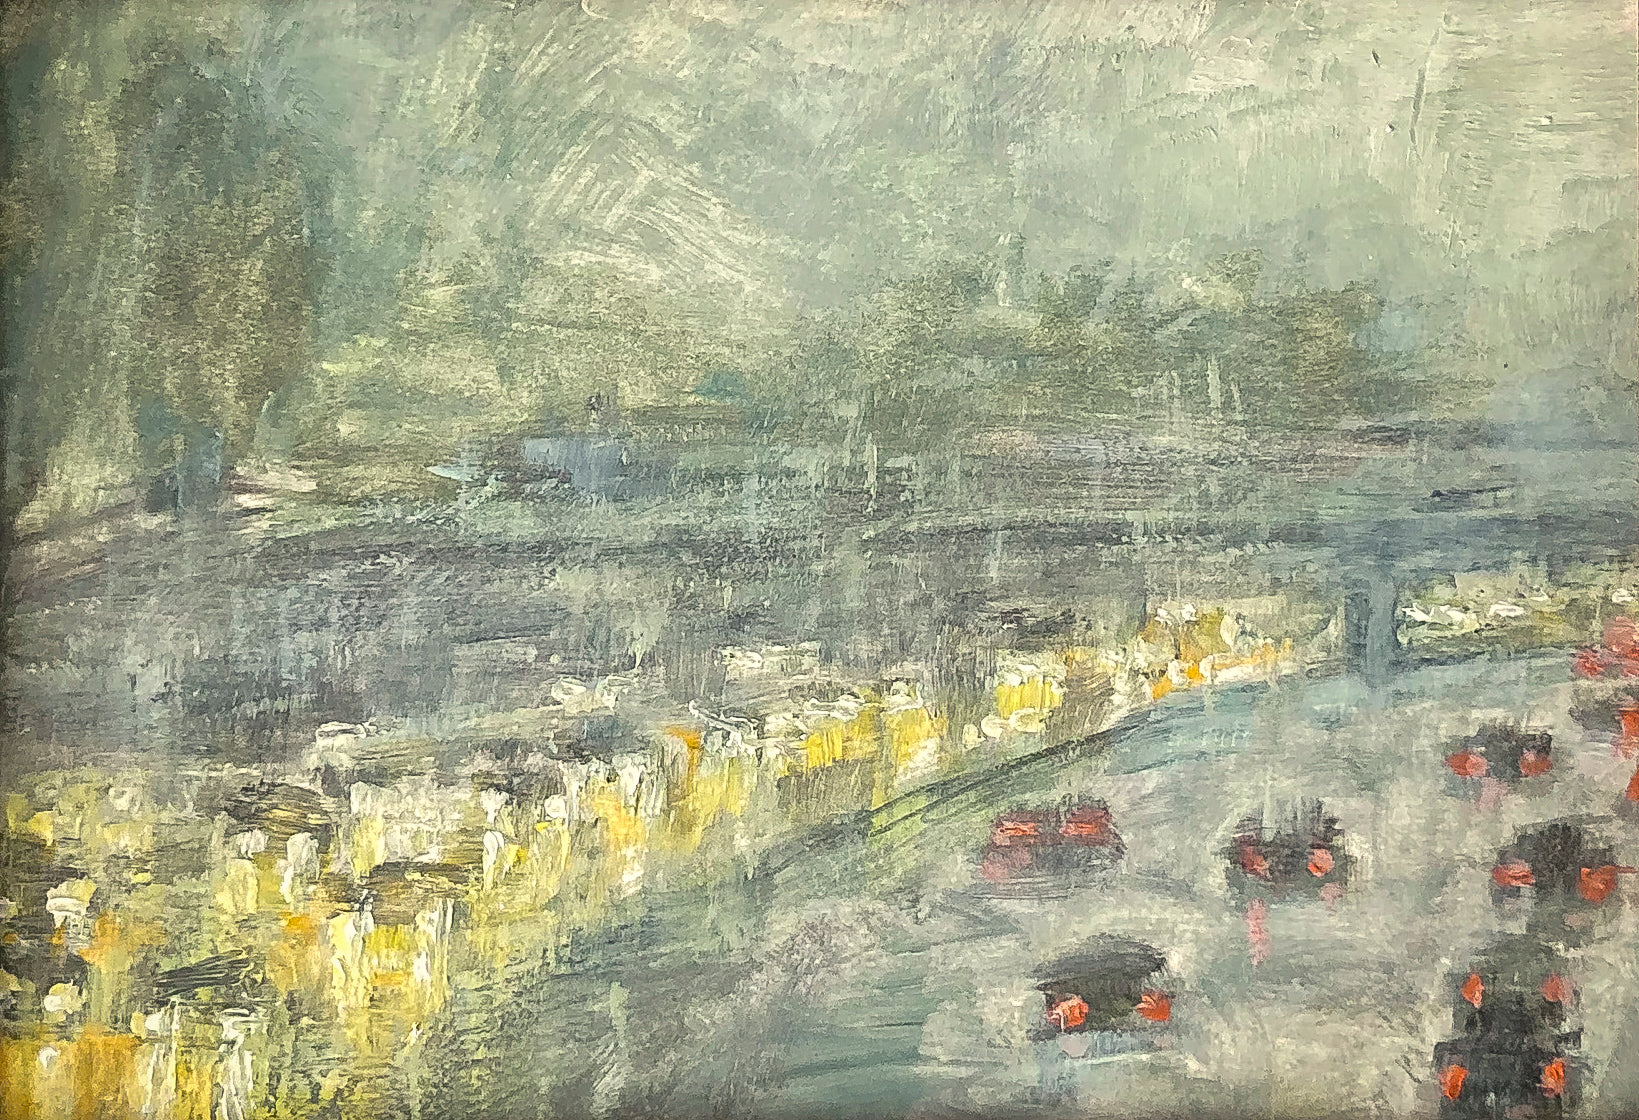 Oil on paper painting; impressionistic view of traffic w/red tail lights and headlights in mist/rain; 5"x7" image; artist E. E. Jacks